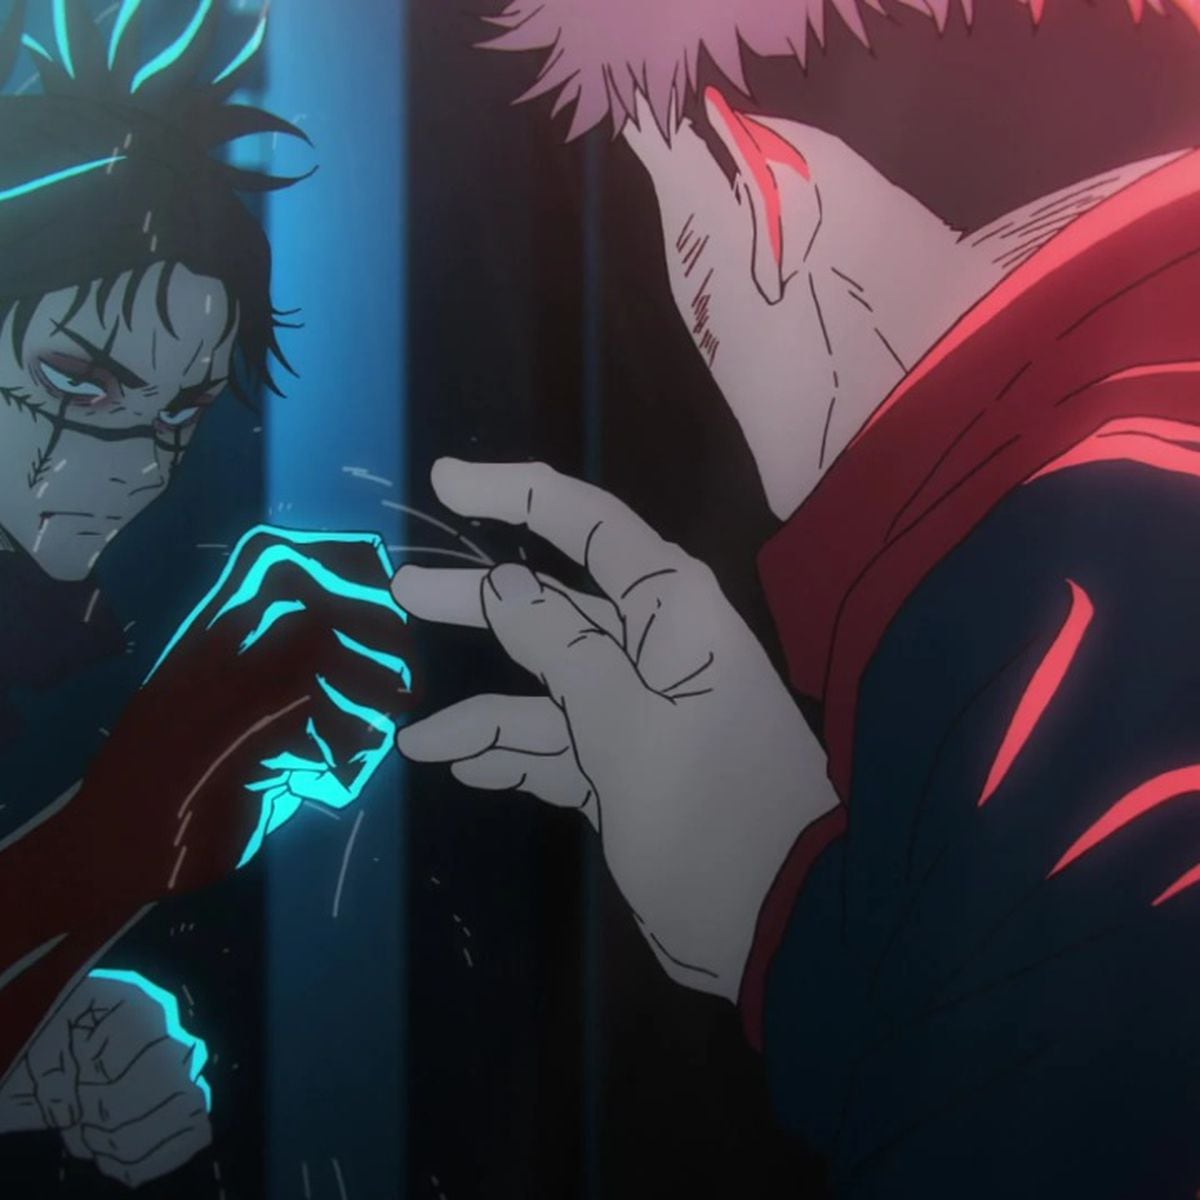 How to watch Jujutsu Kaisen in chronological order: movies and anime  seasons - Meristation